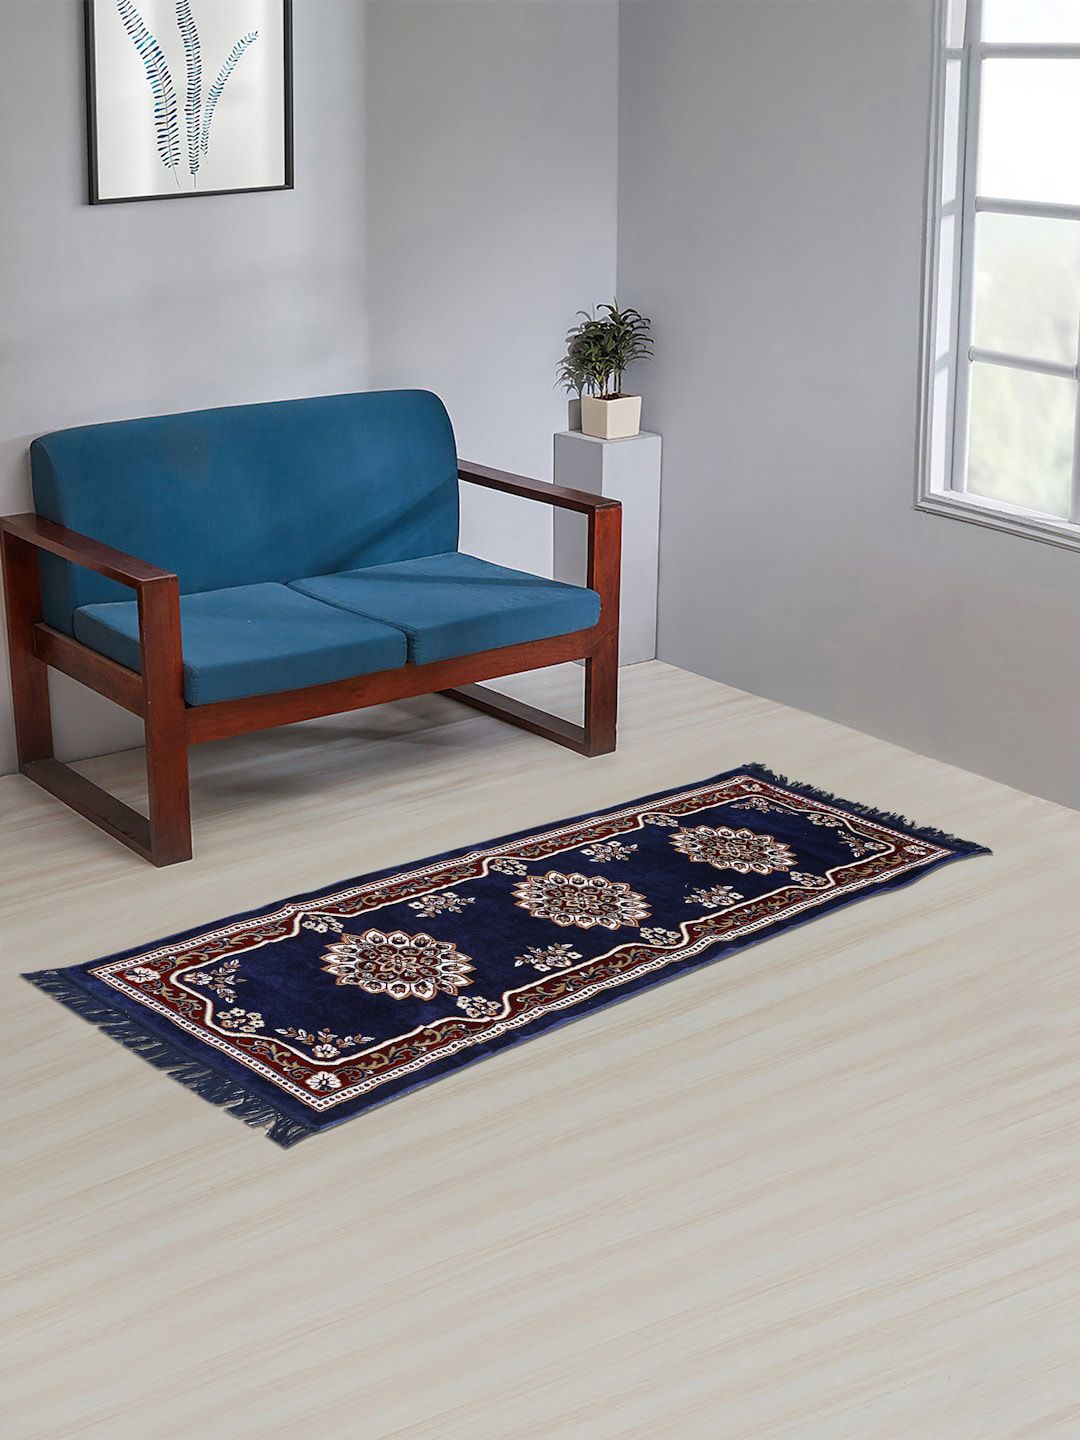 KLOTTHE Blue & Brown Floral Printed Cotton Carpet Price in India